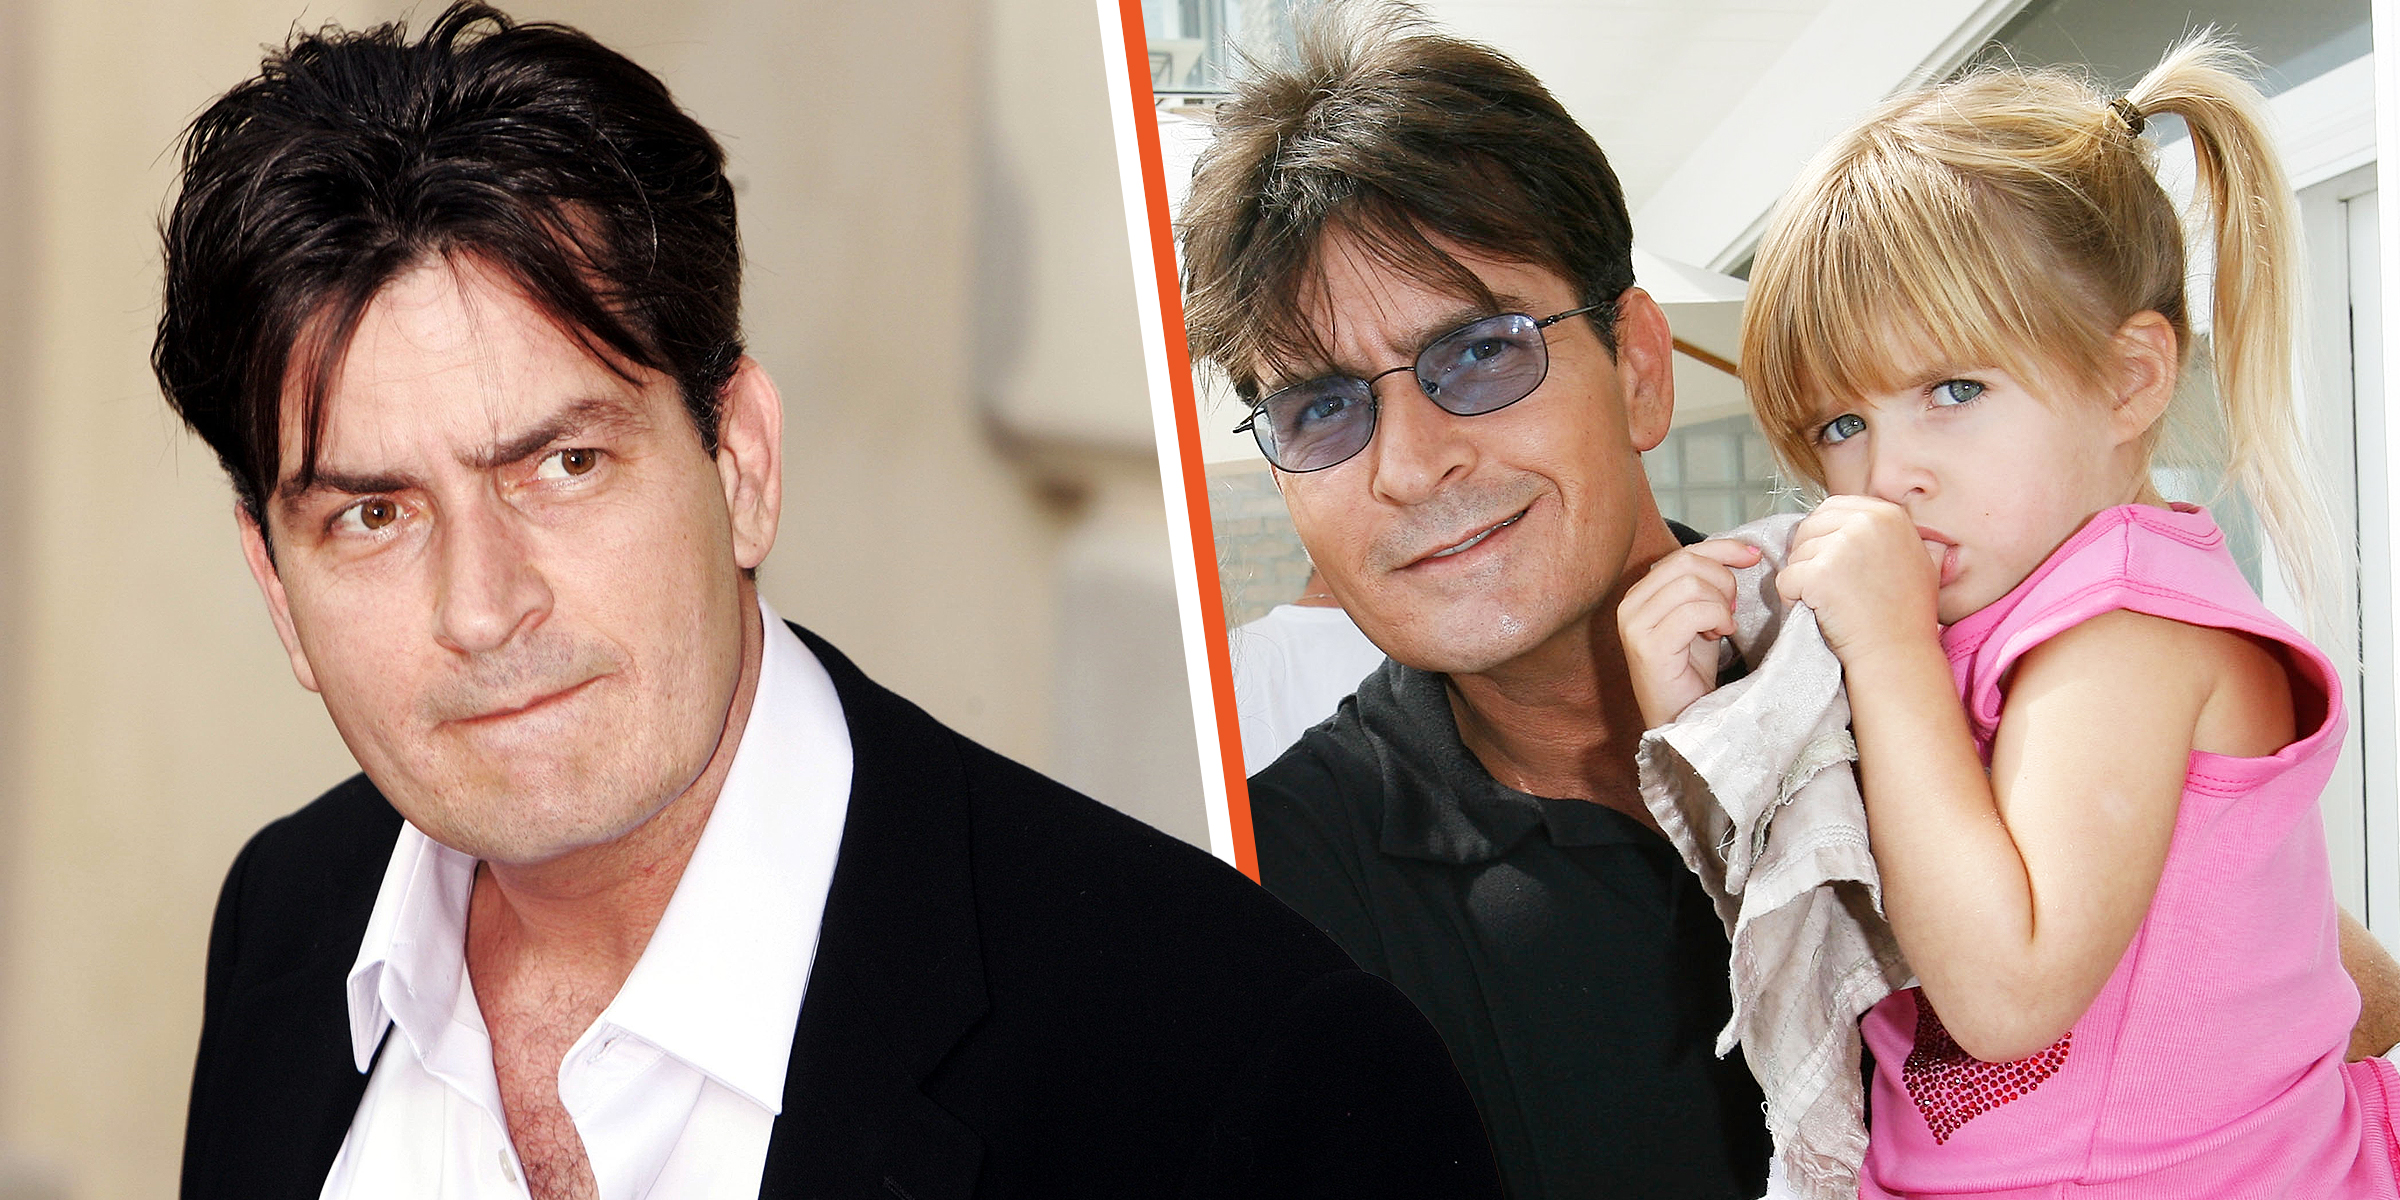 Charlie Sheen | Charlie Sheen and Sam Sheen | Source: Getty Images